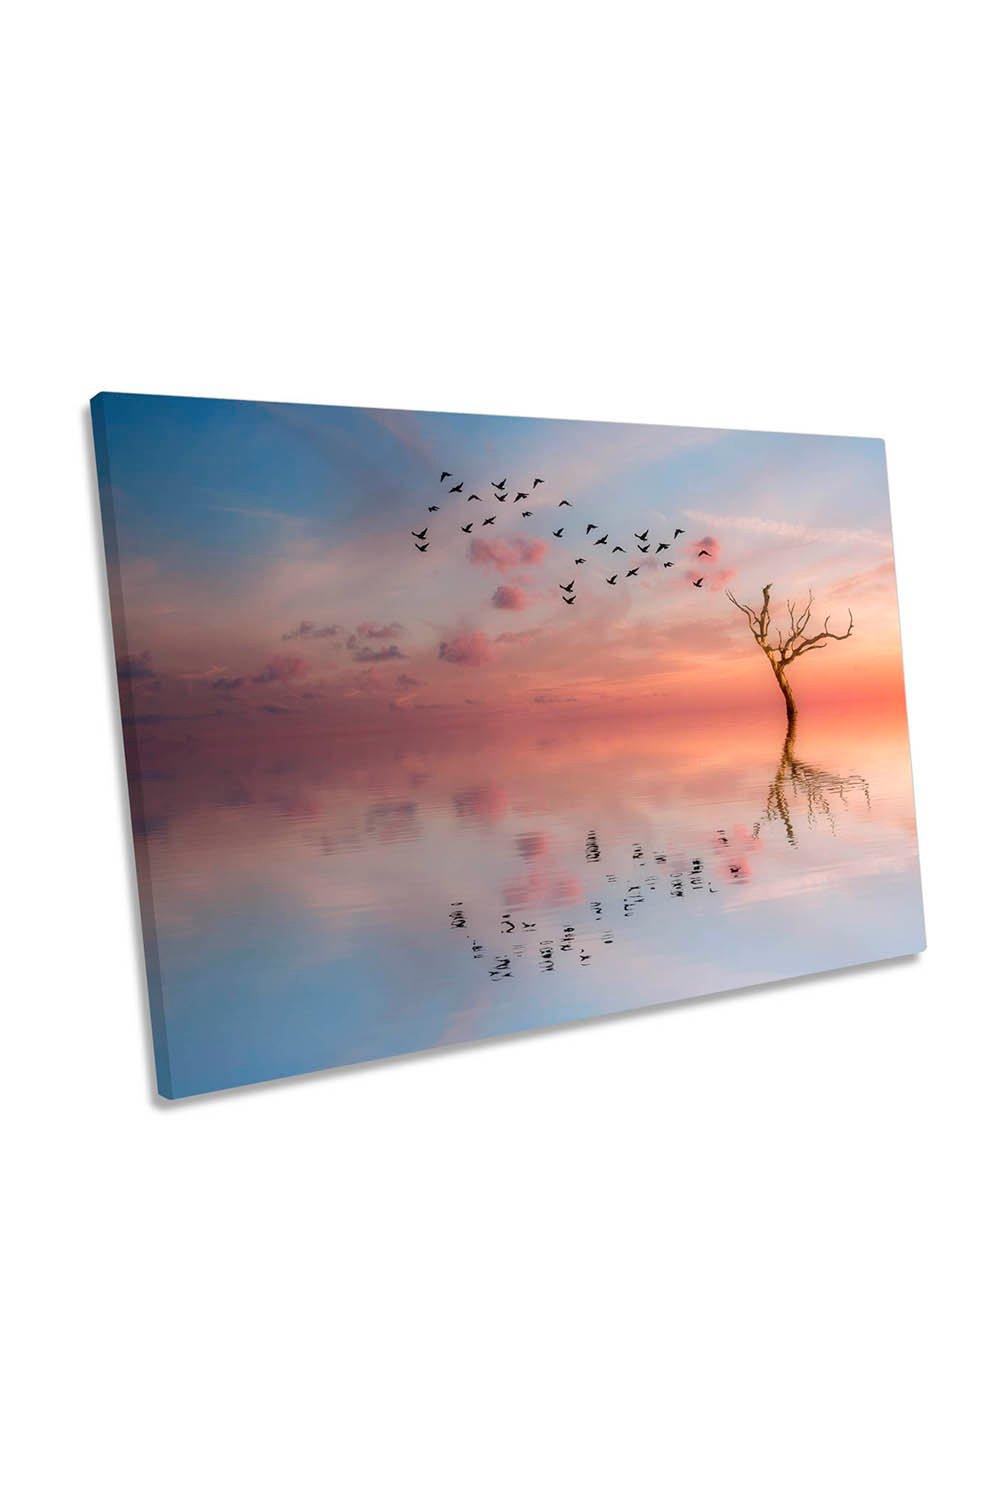 Lonely Tree Lake Refection Birds Sunset Canvas Wall Art Picture Print